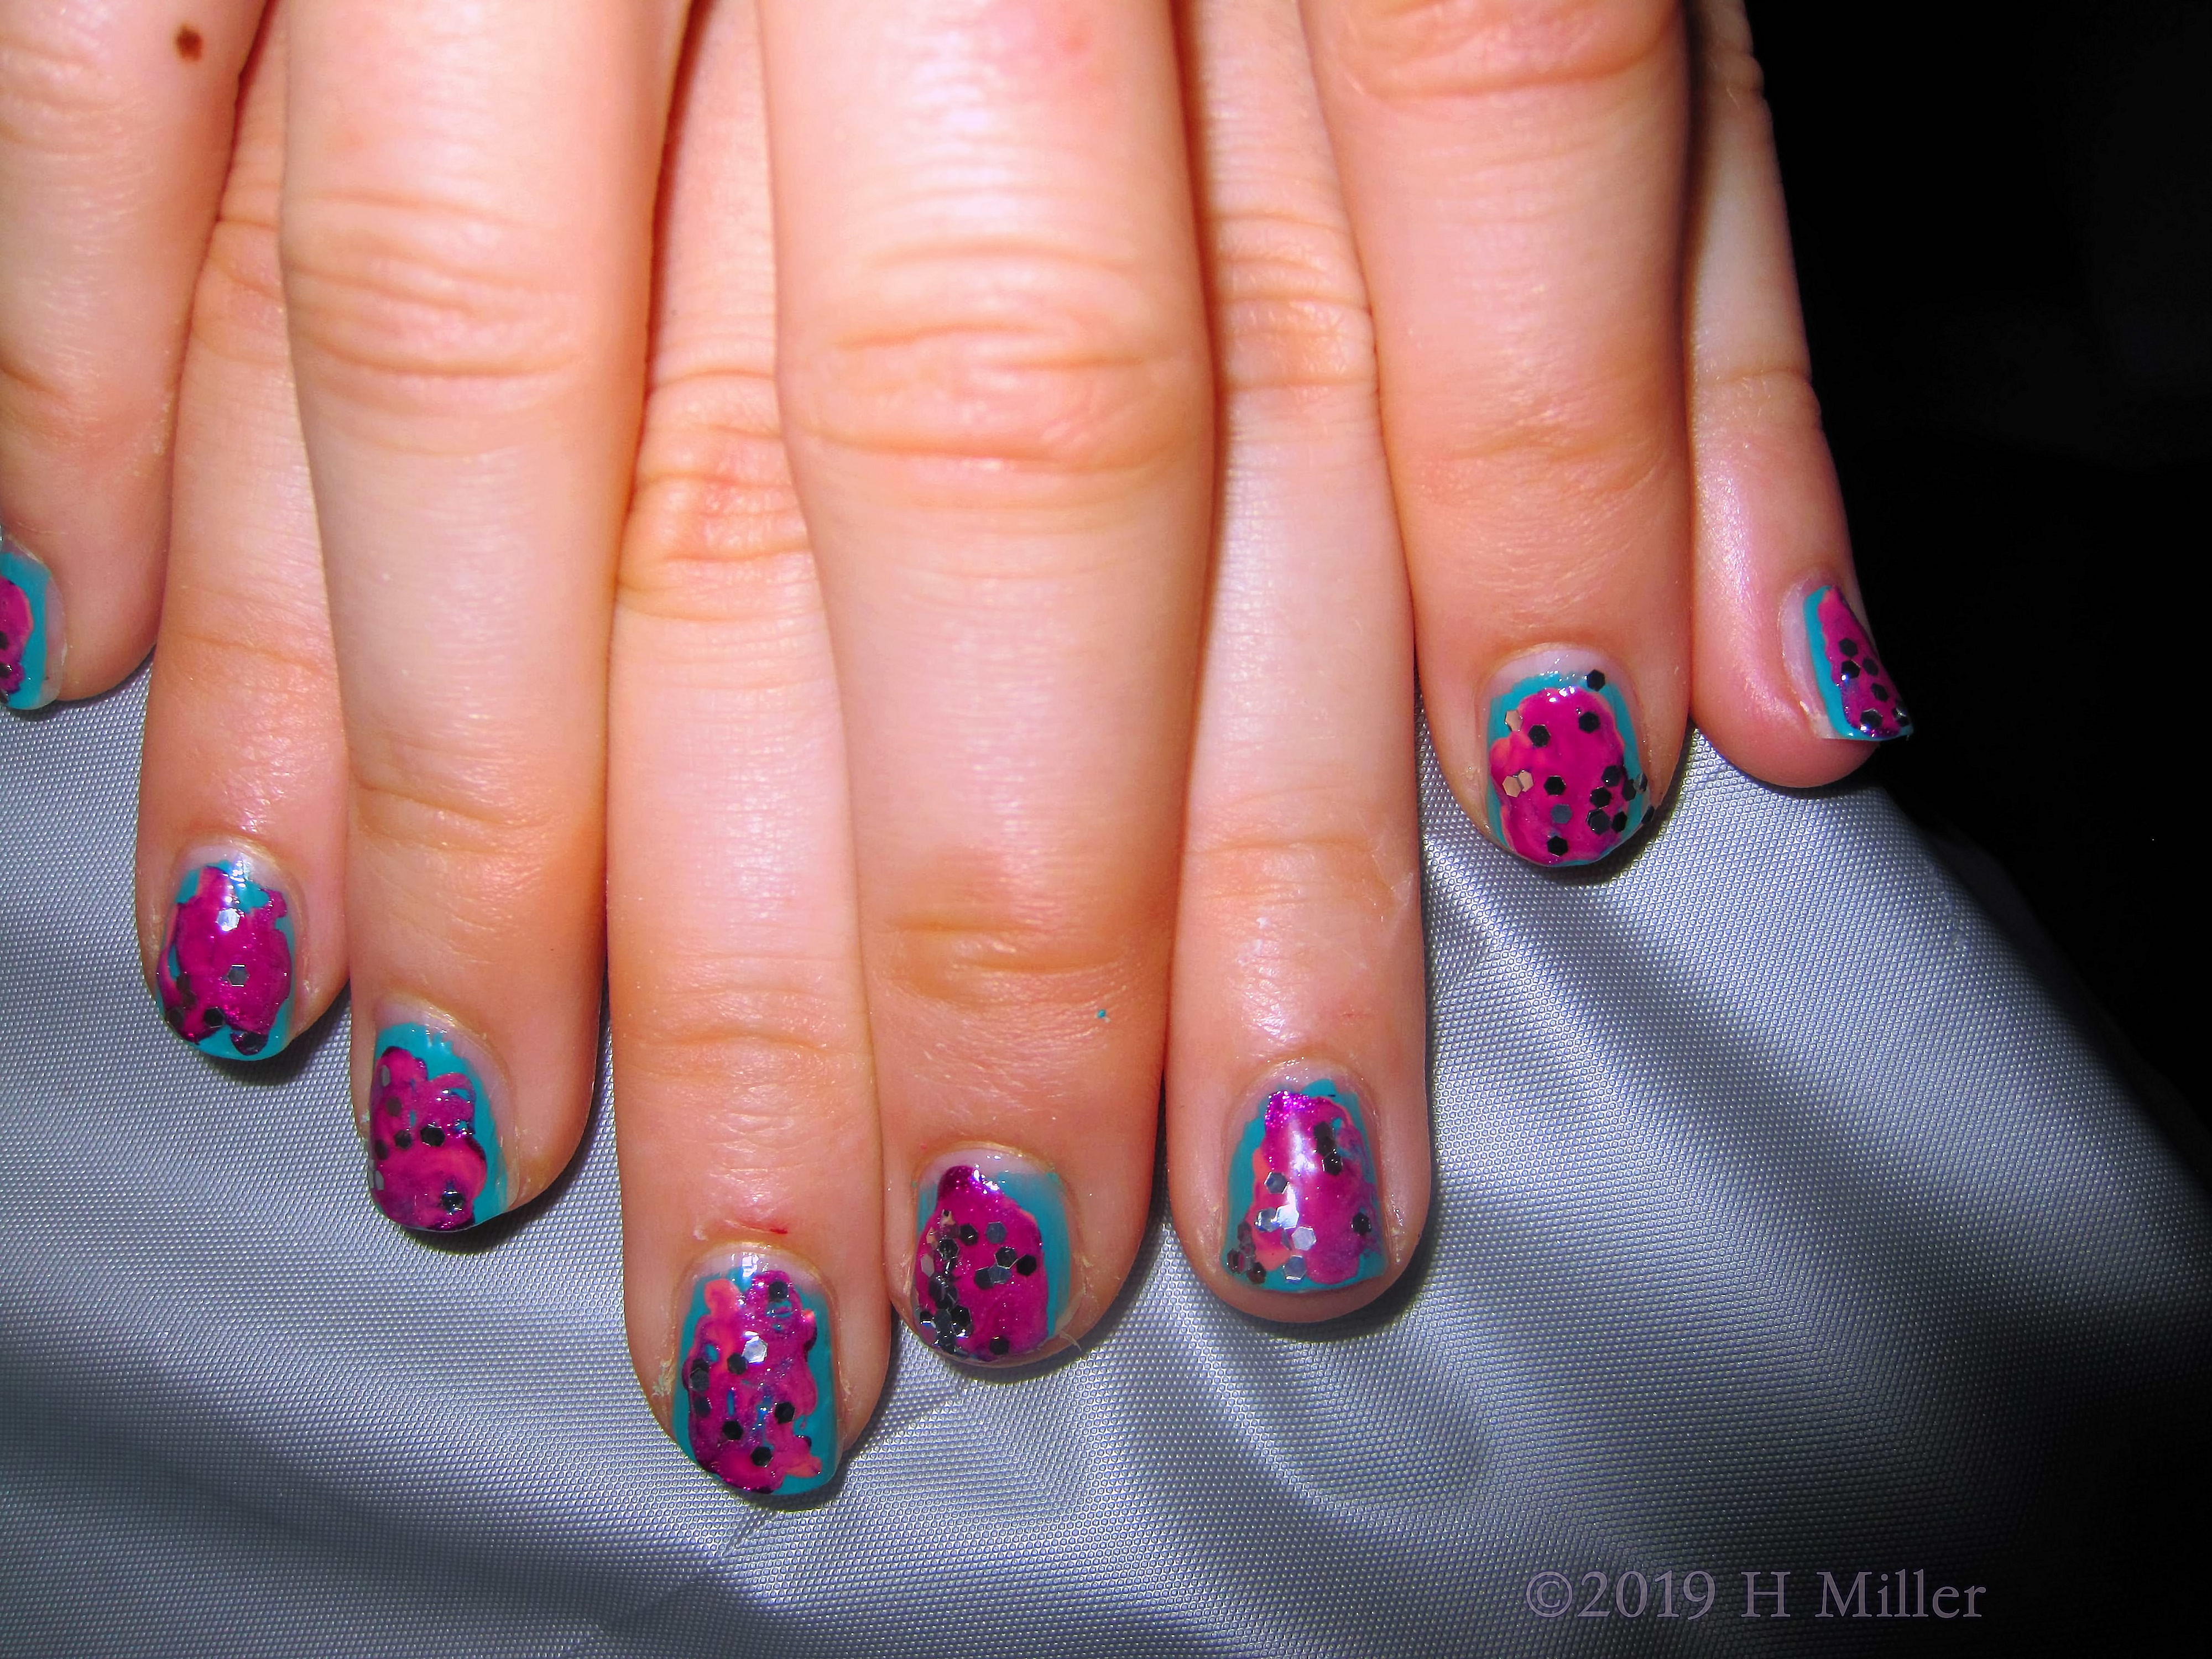 Kids Manicure With Marbling Nail Art With Glitter Overlay.